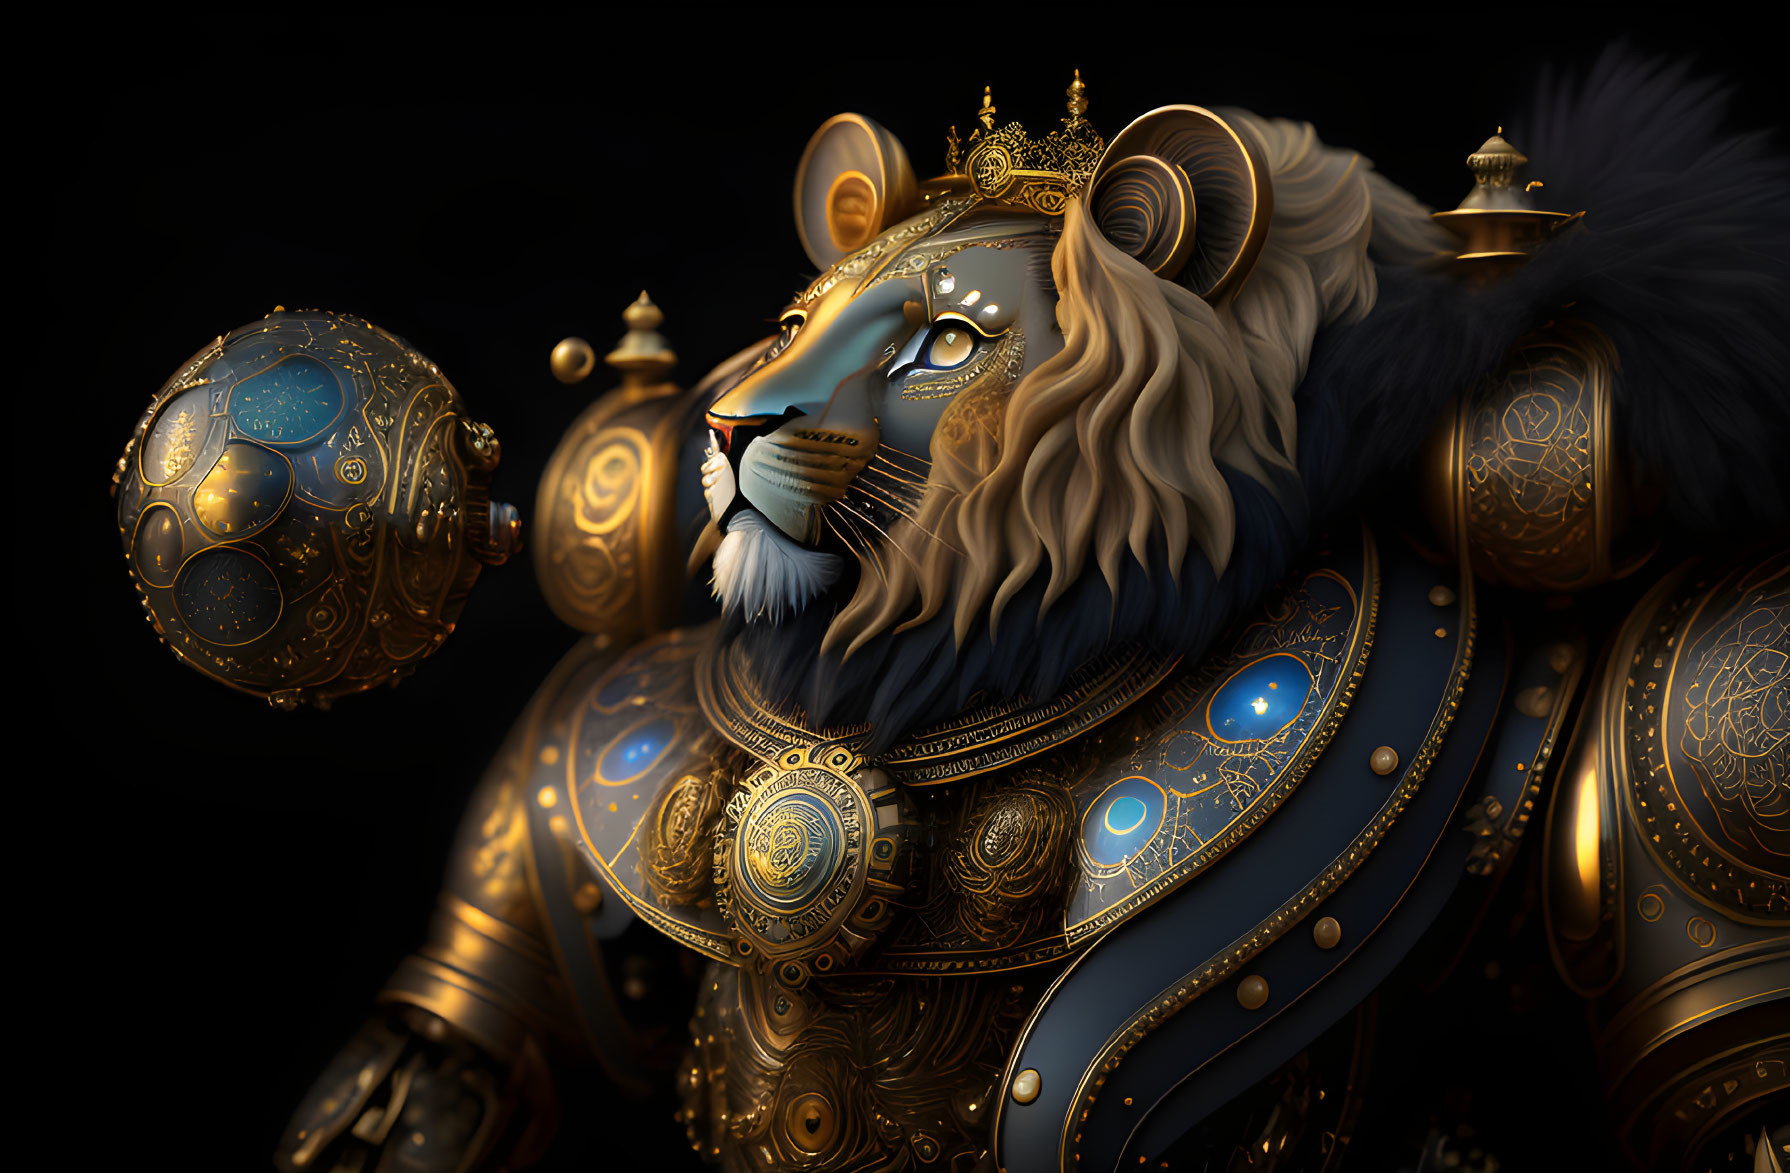 Golden maned mechanical lion in regal armor with orb and crown